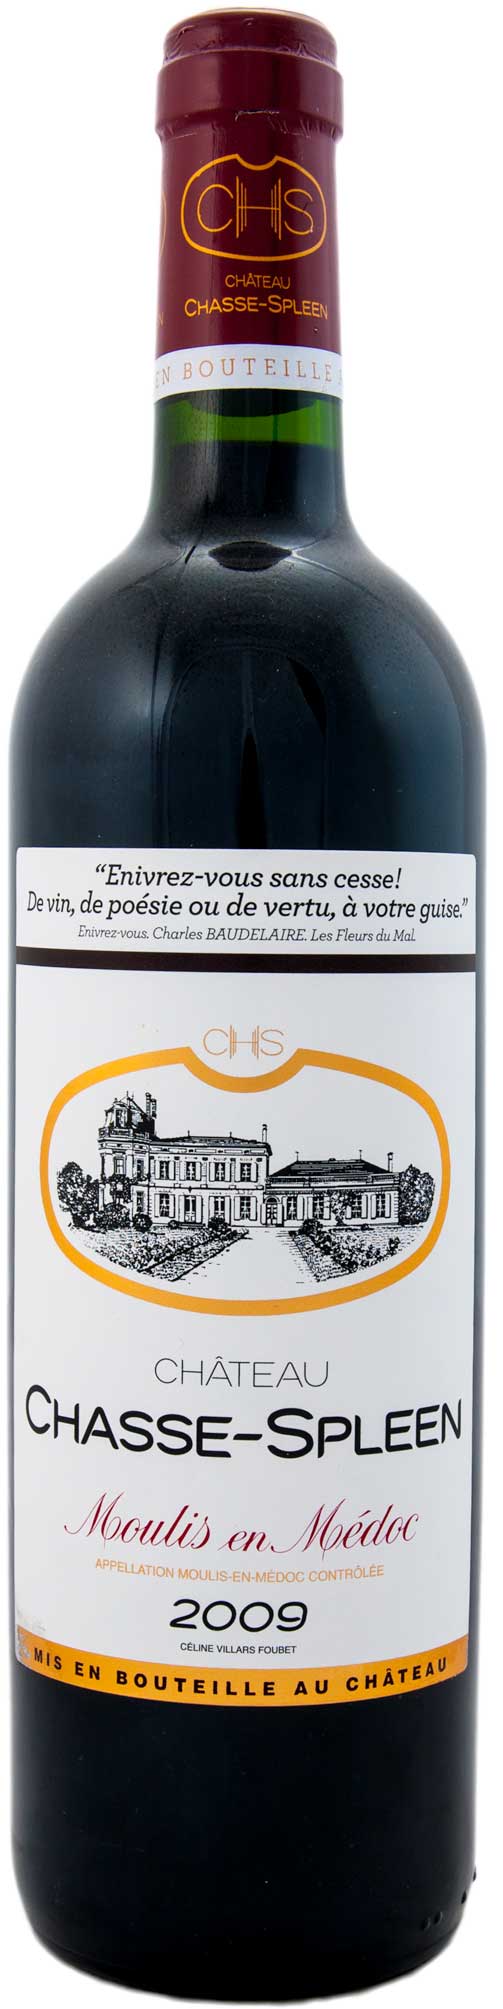 2009 Château Chasses Spleen, Moulis